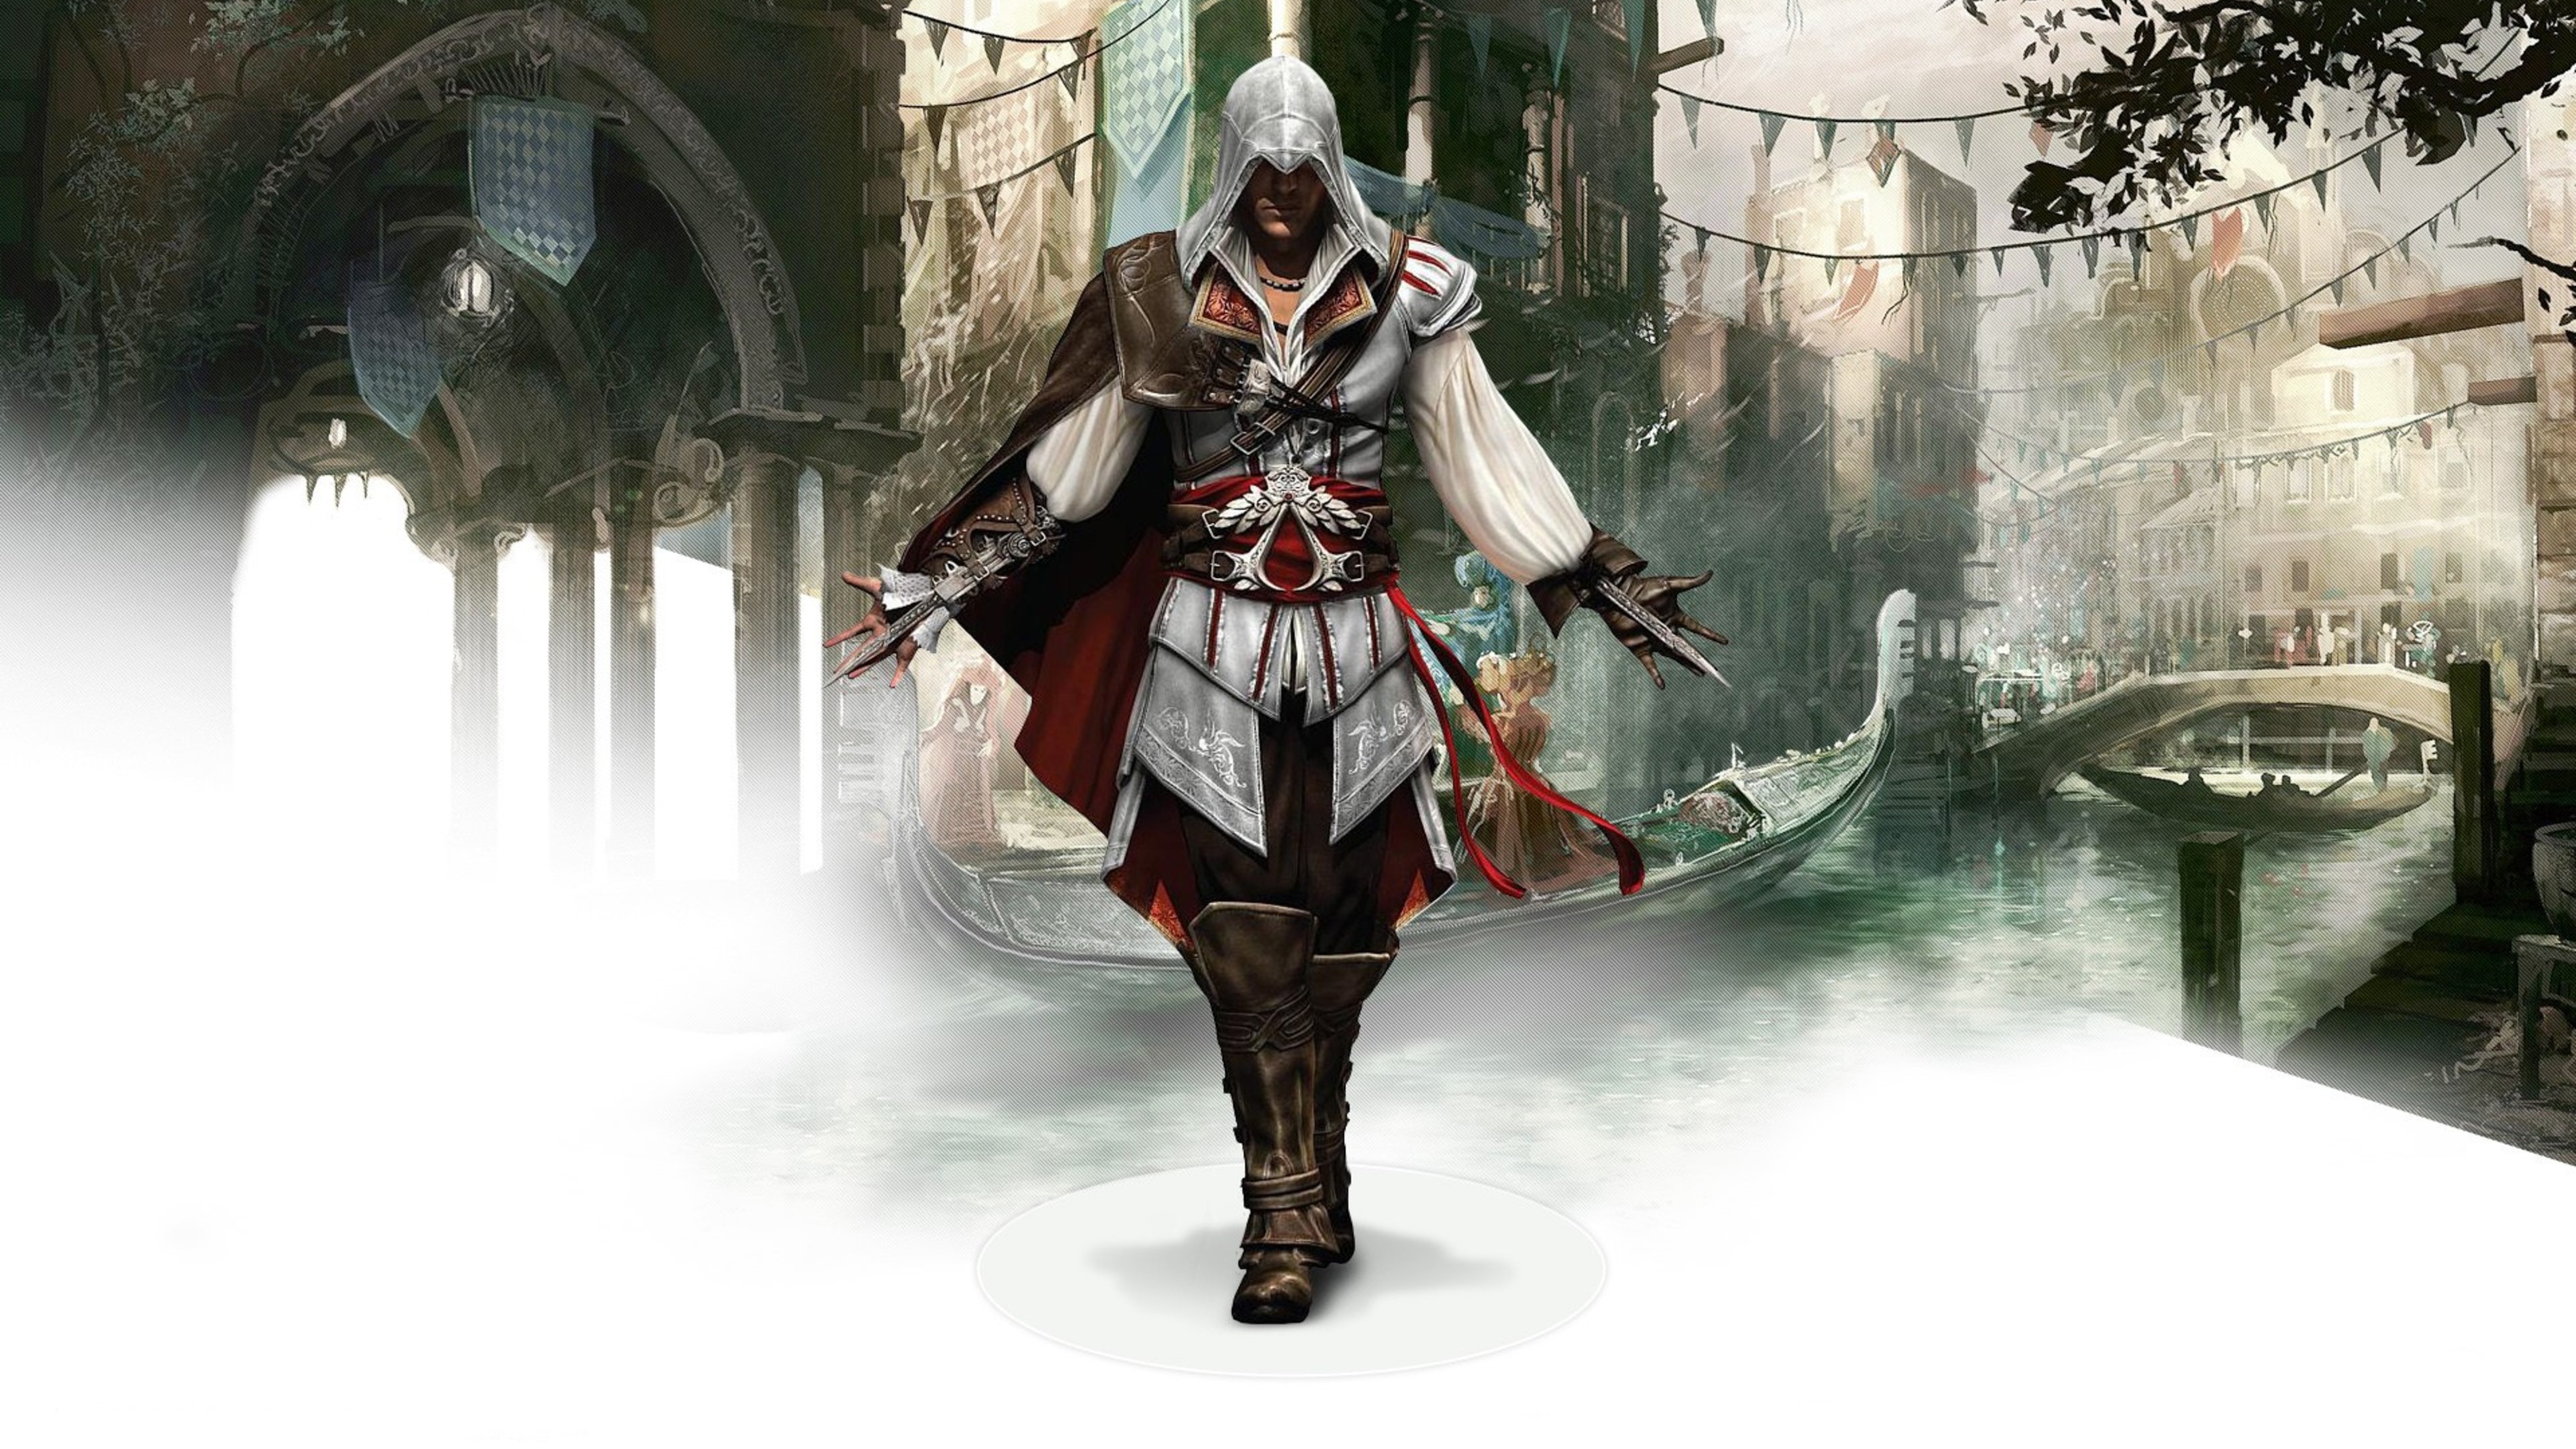 assassins creed game 1535967372 - Assassins Creed Game - xbox games wallpapers, ps games wallpapers, pc games wallpapers, games wallpapers, assassins creed wallpapers